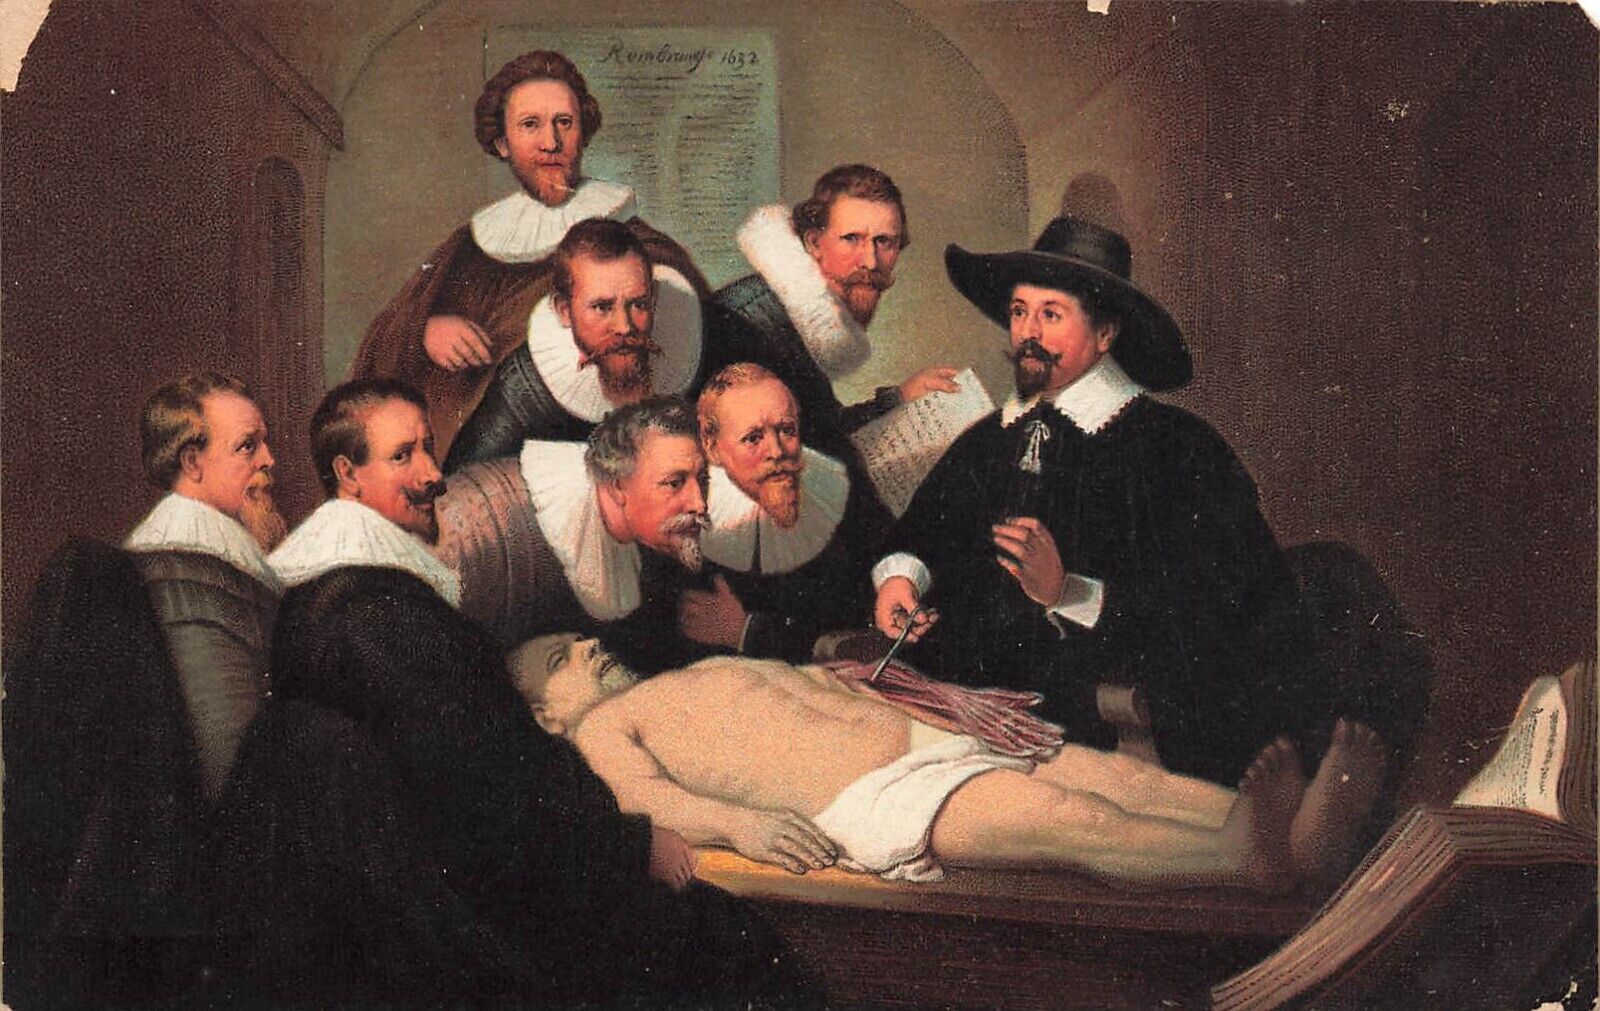 RPPC ~ Instructing Anatomy on Cadaver, Copy of Rembrandt Painting, by Stengel